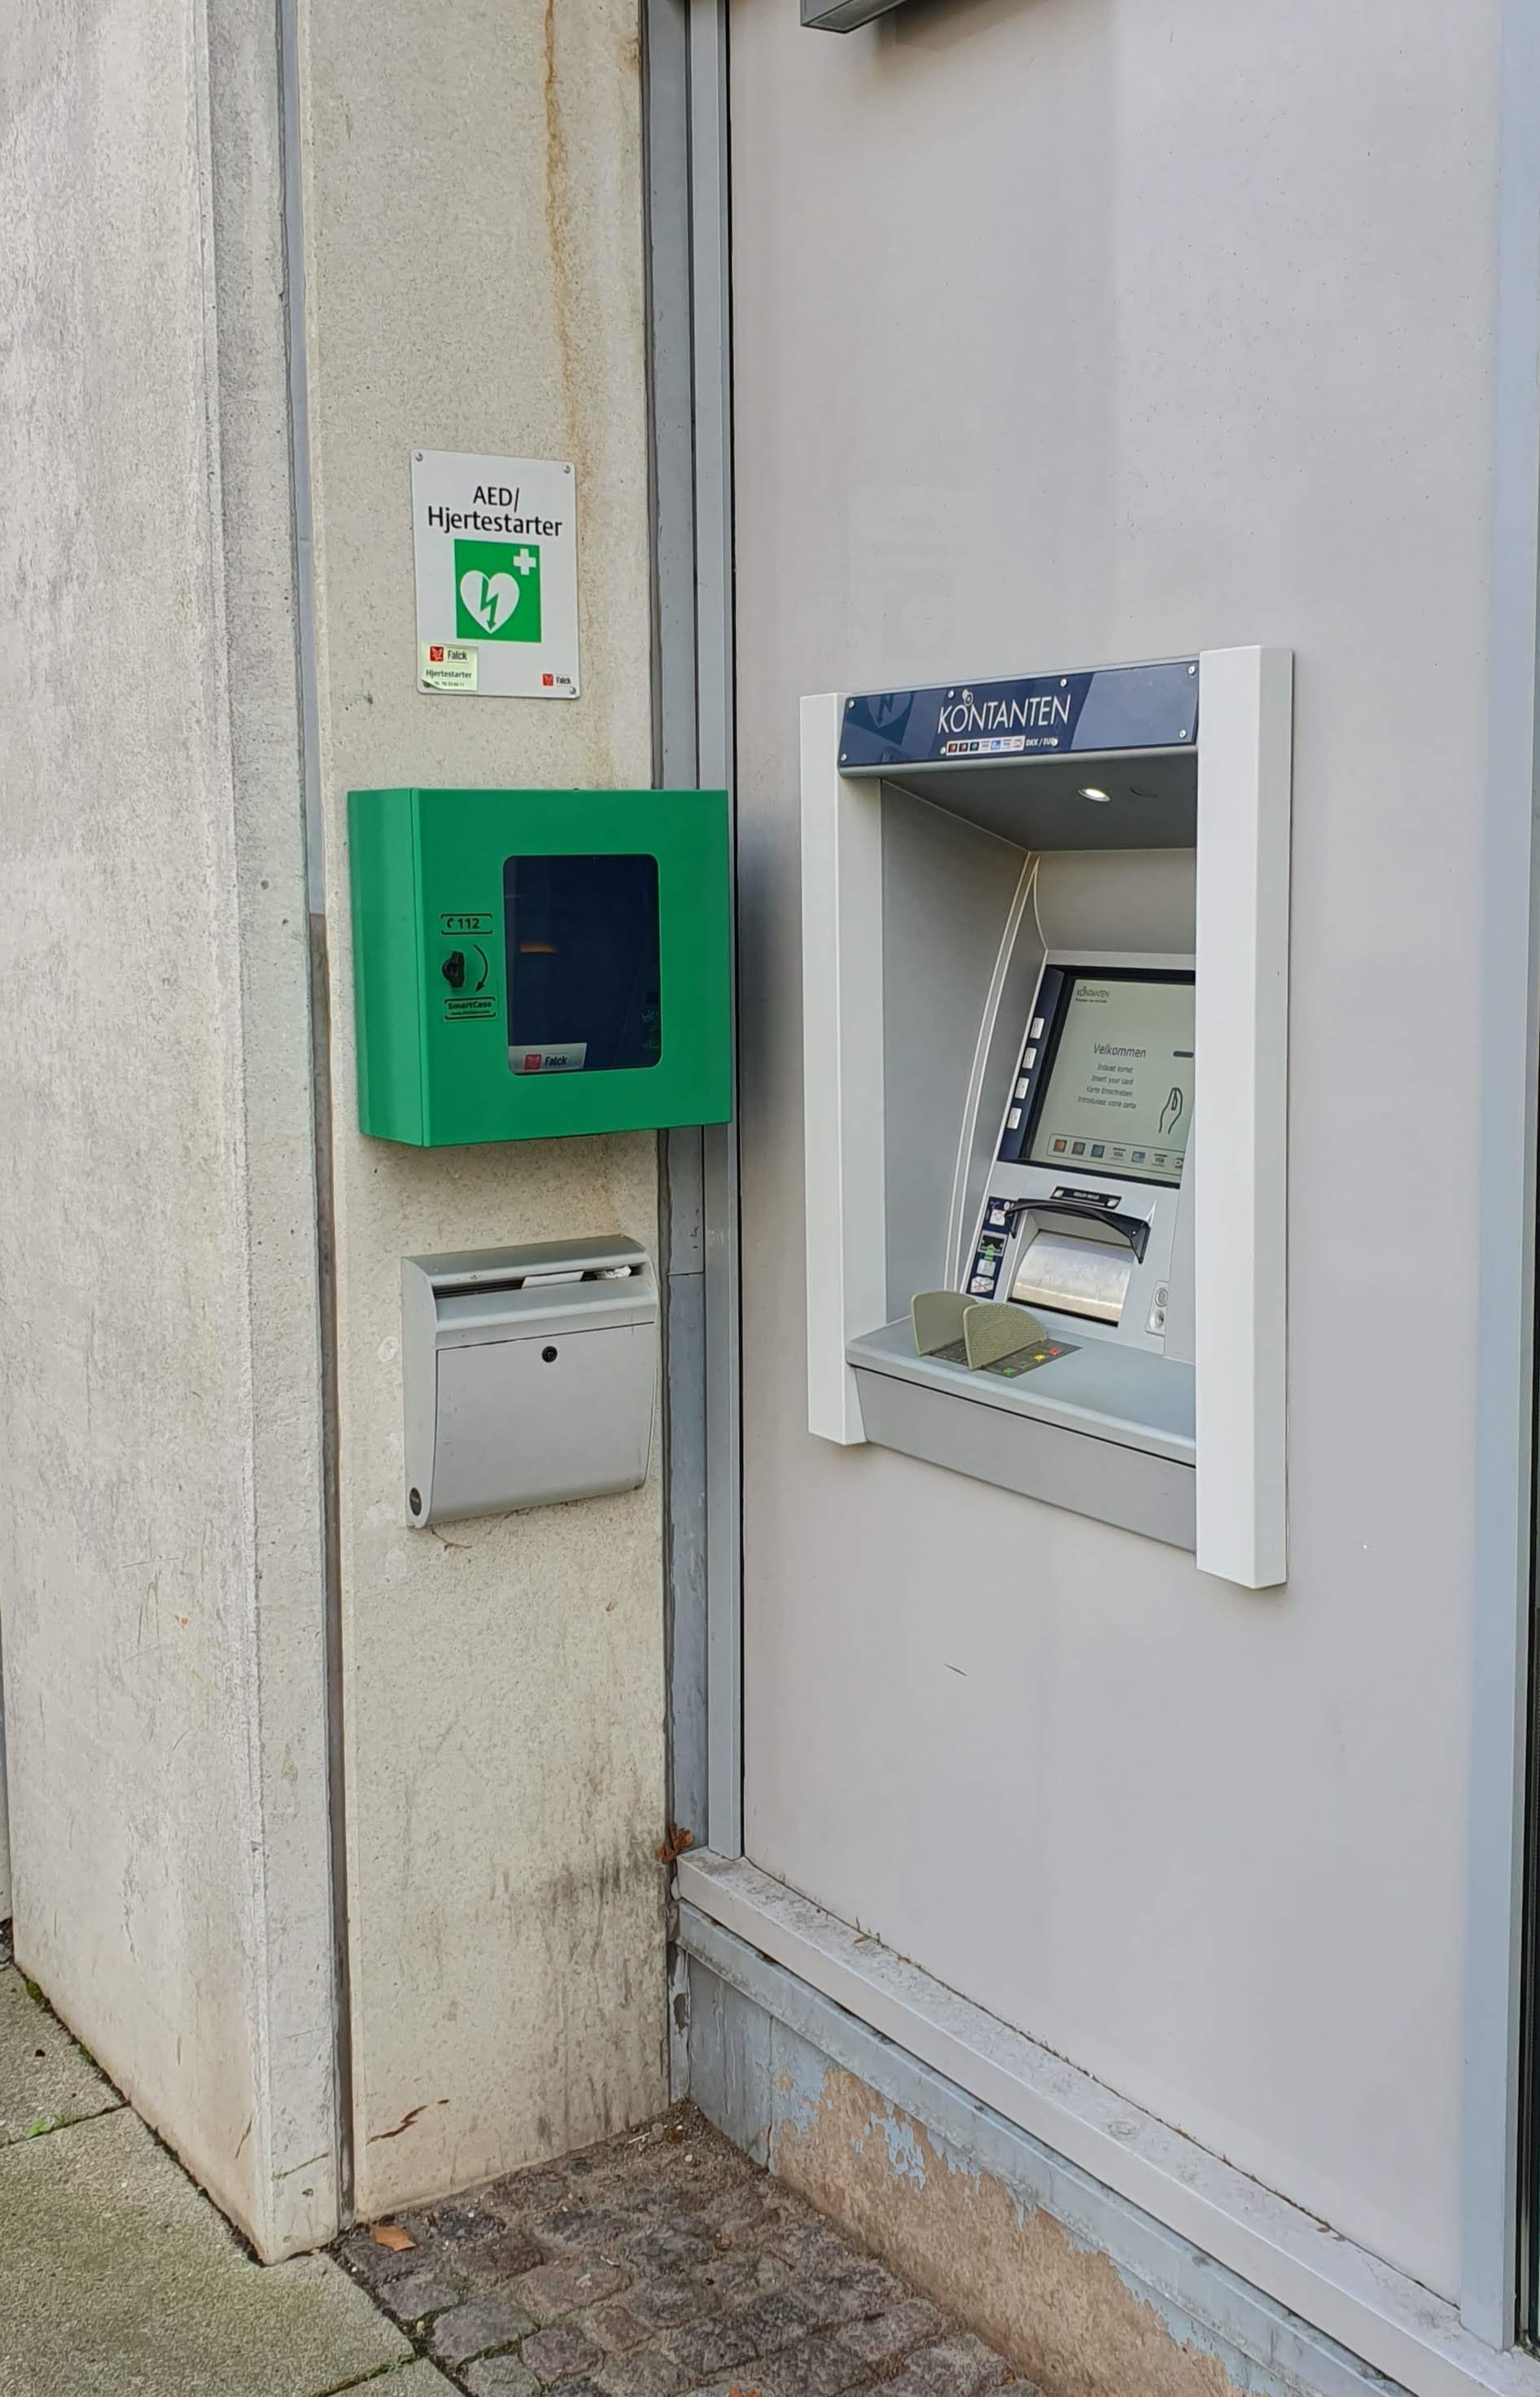 This ATM in Denmark with a defibrillator hanging right next to it, just in case you get a heart attack when seeing your account balance.